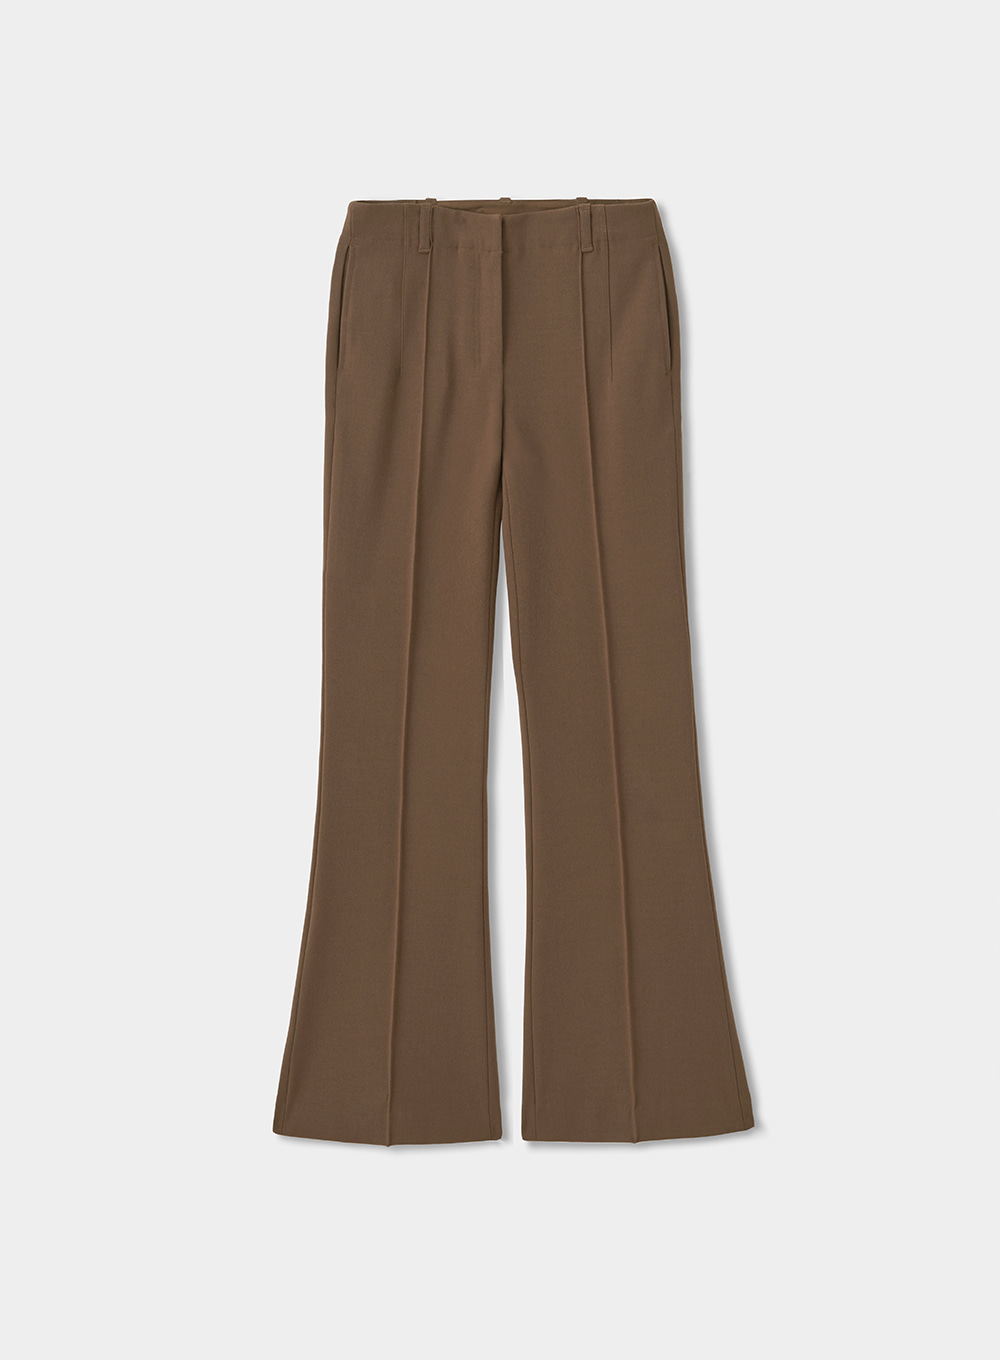 Brill Twill Flare Pants - Toffee Brown